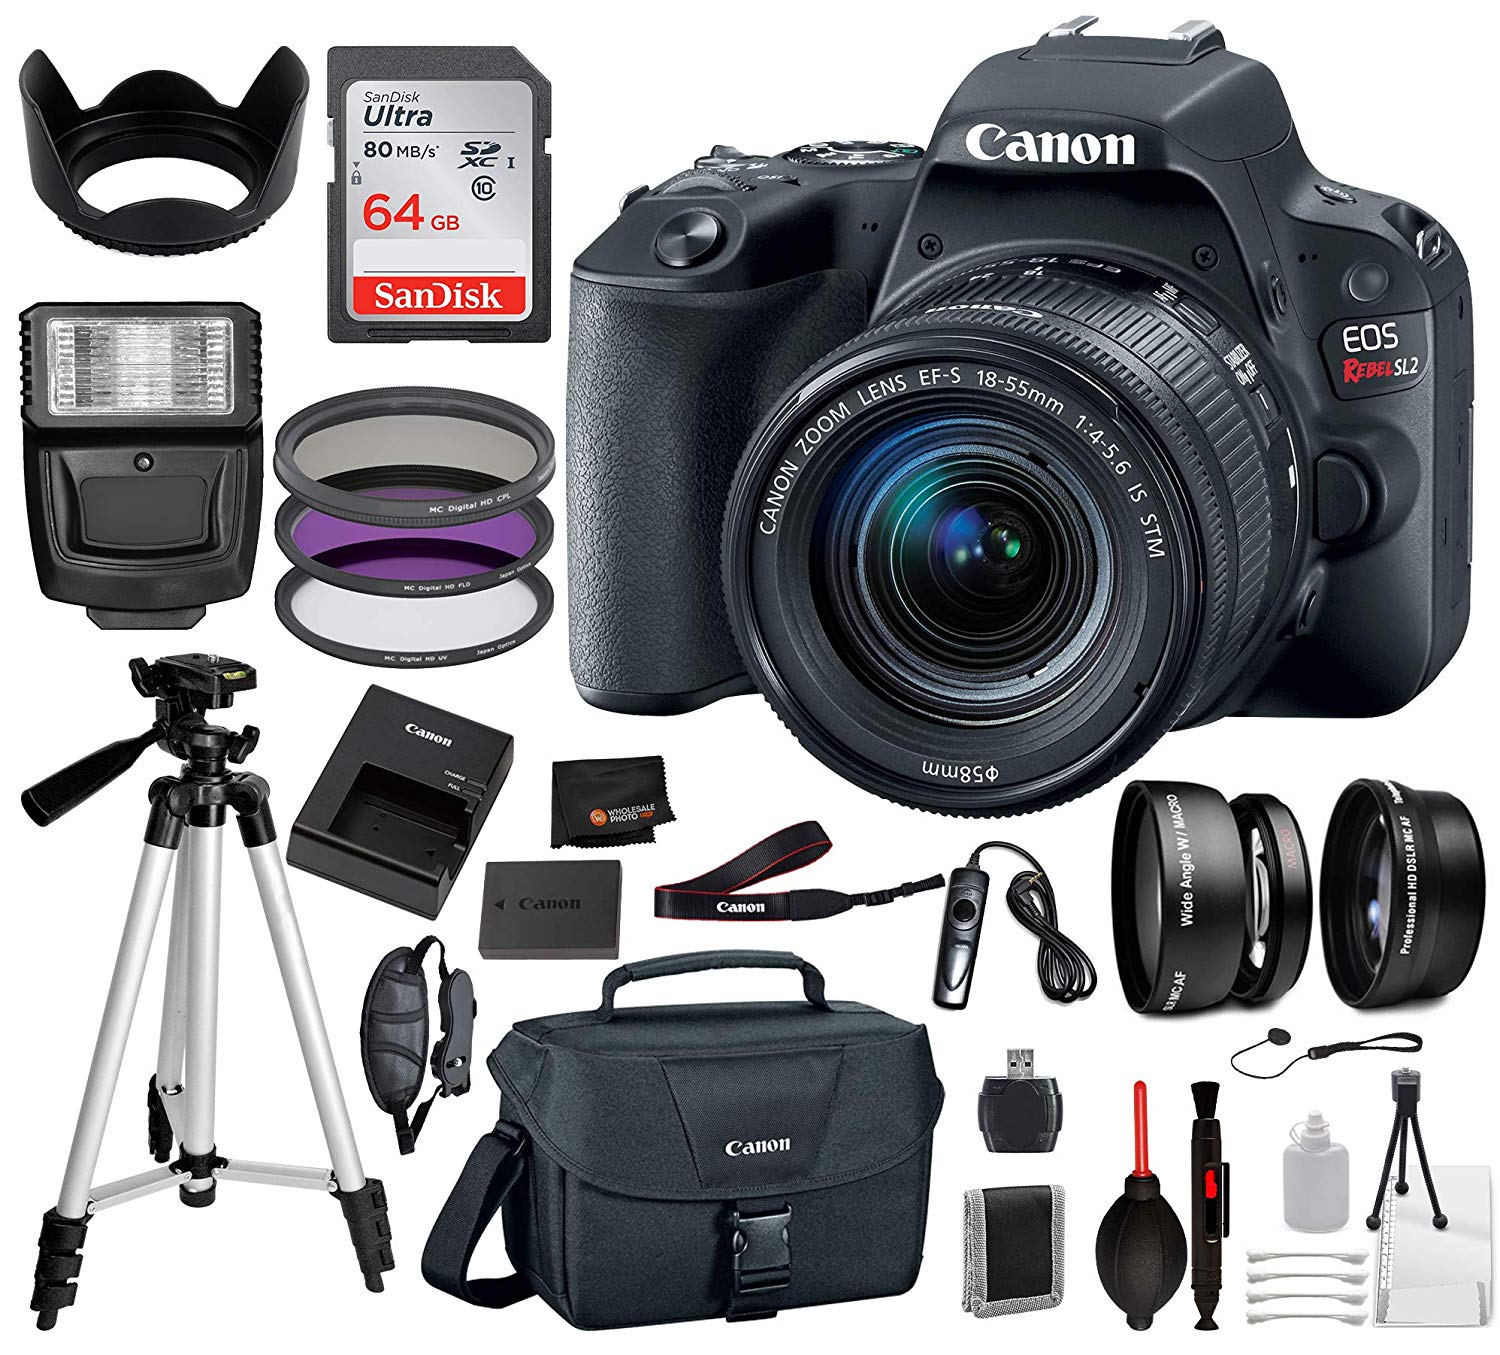 Canon EOS Rebel SL2 DSLR Camera with 18-55mm Lens 17PC Professional Bundle Package Deal